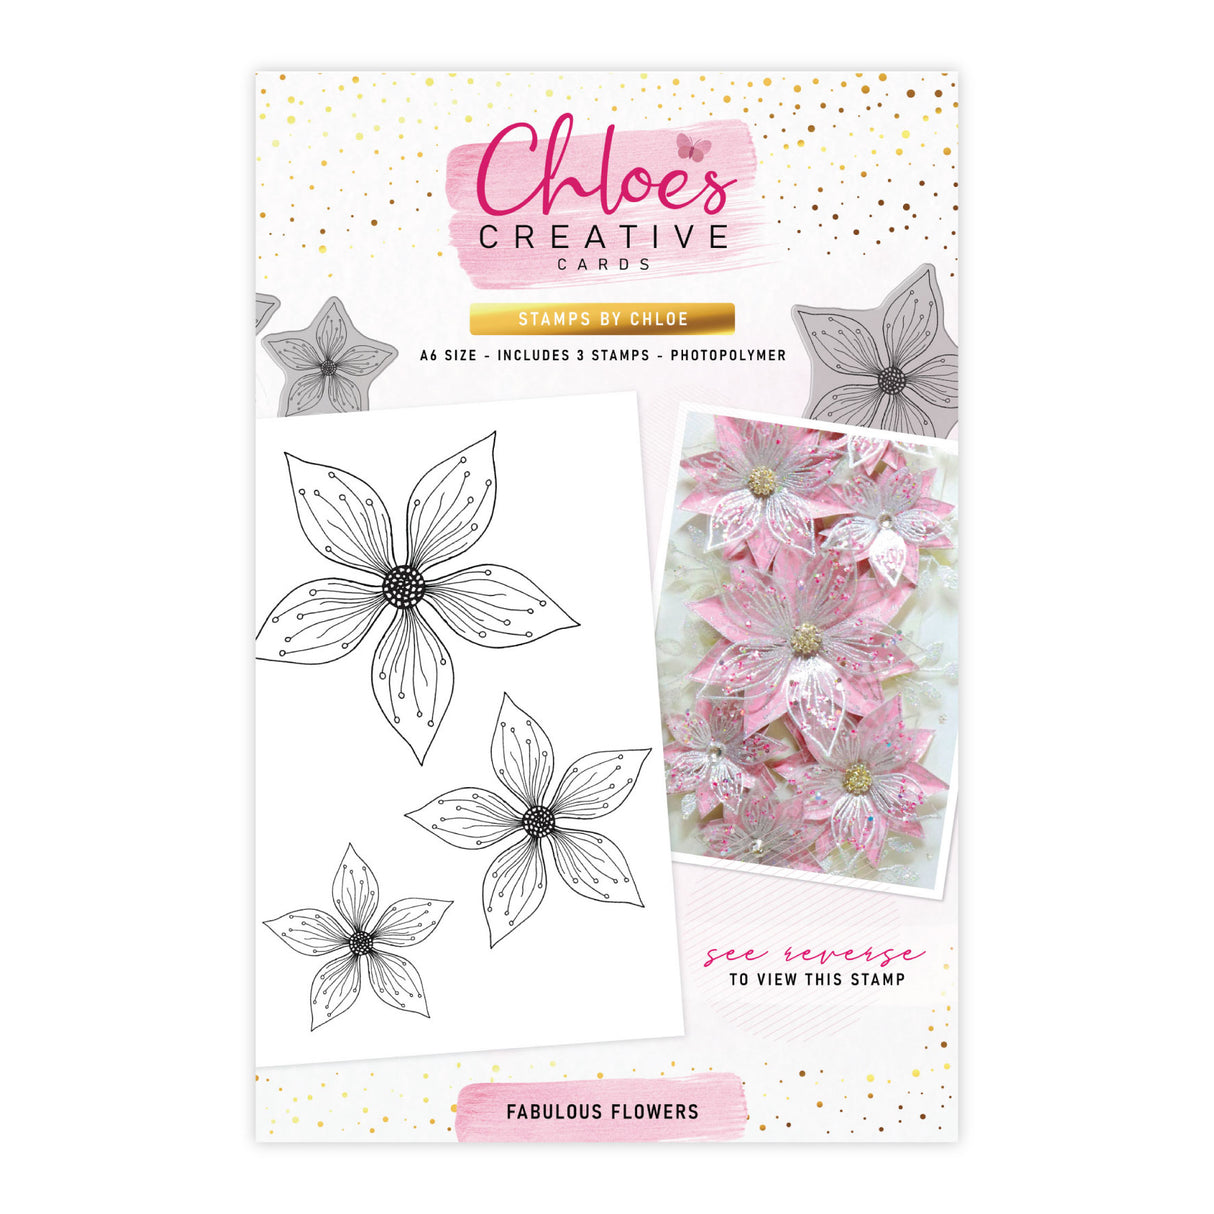 Chloes Creative Cards Photopolymer Stamp Set (A6) - Fabulous Flowers